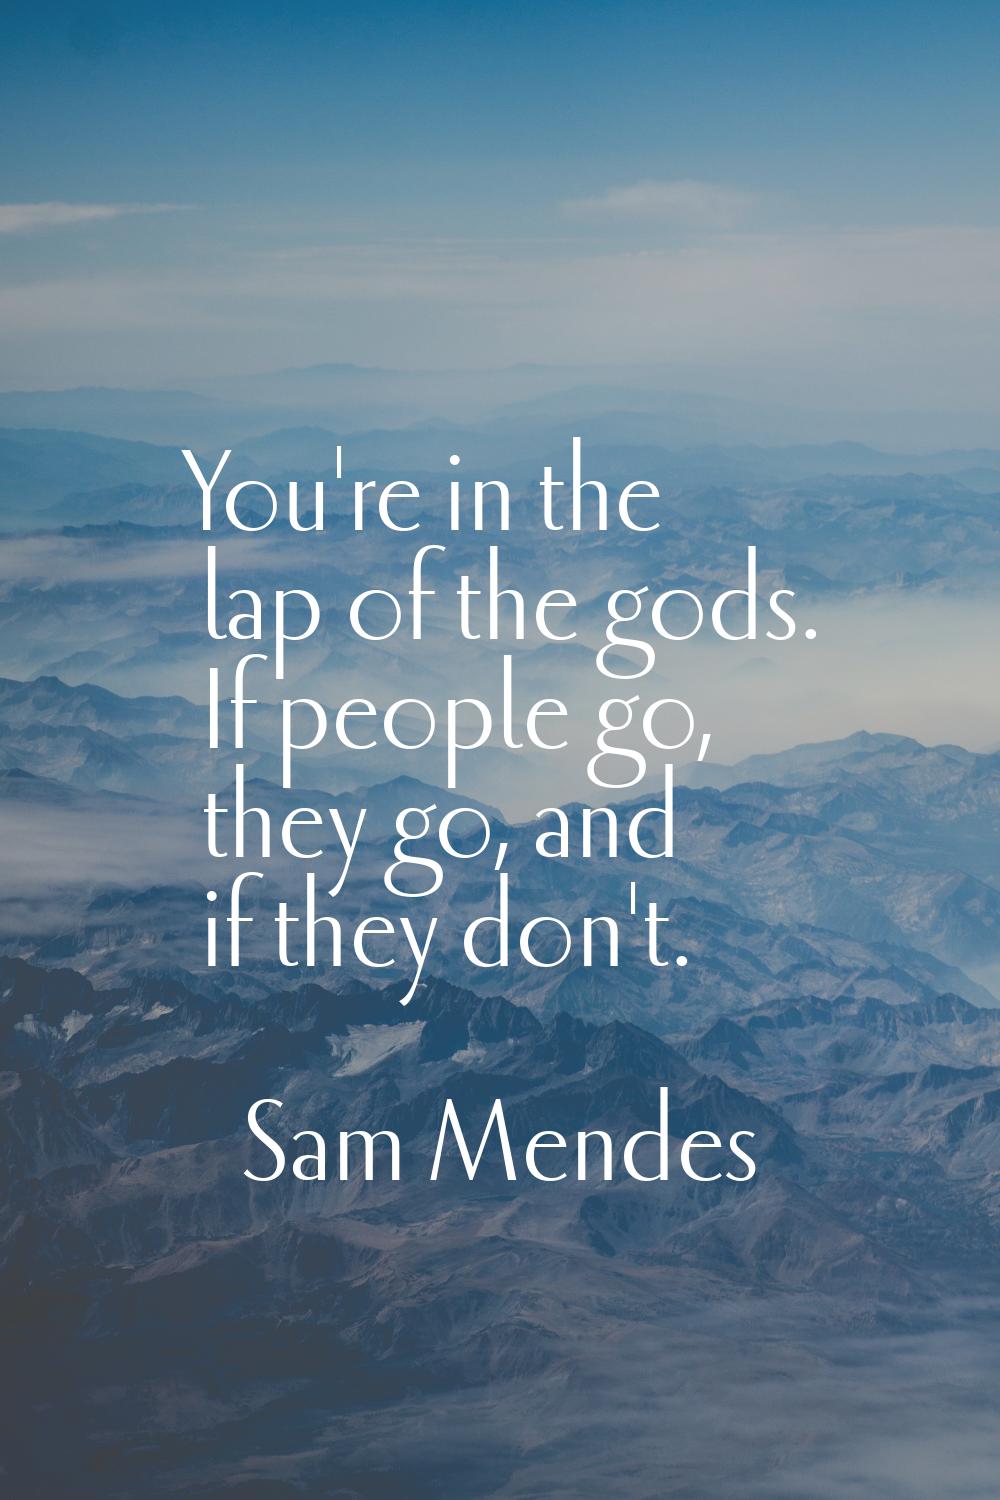 You're in the lap of the gods. If people go, they go, and if they don't.